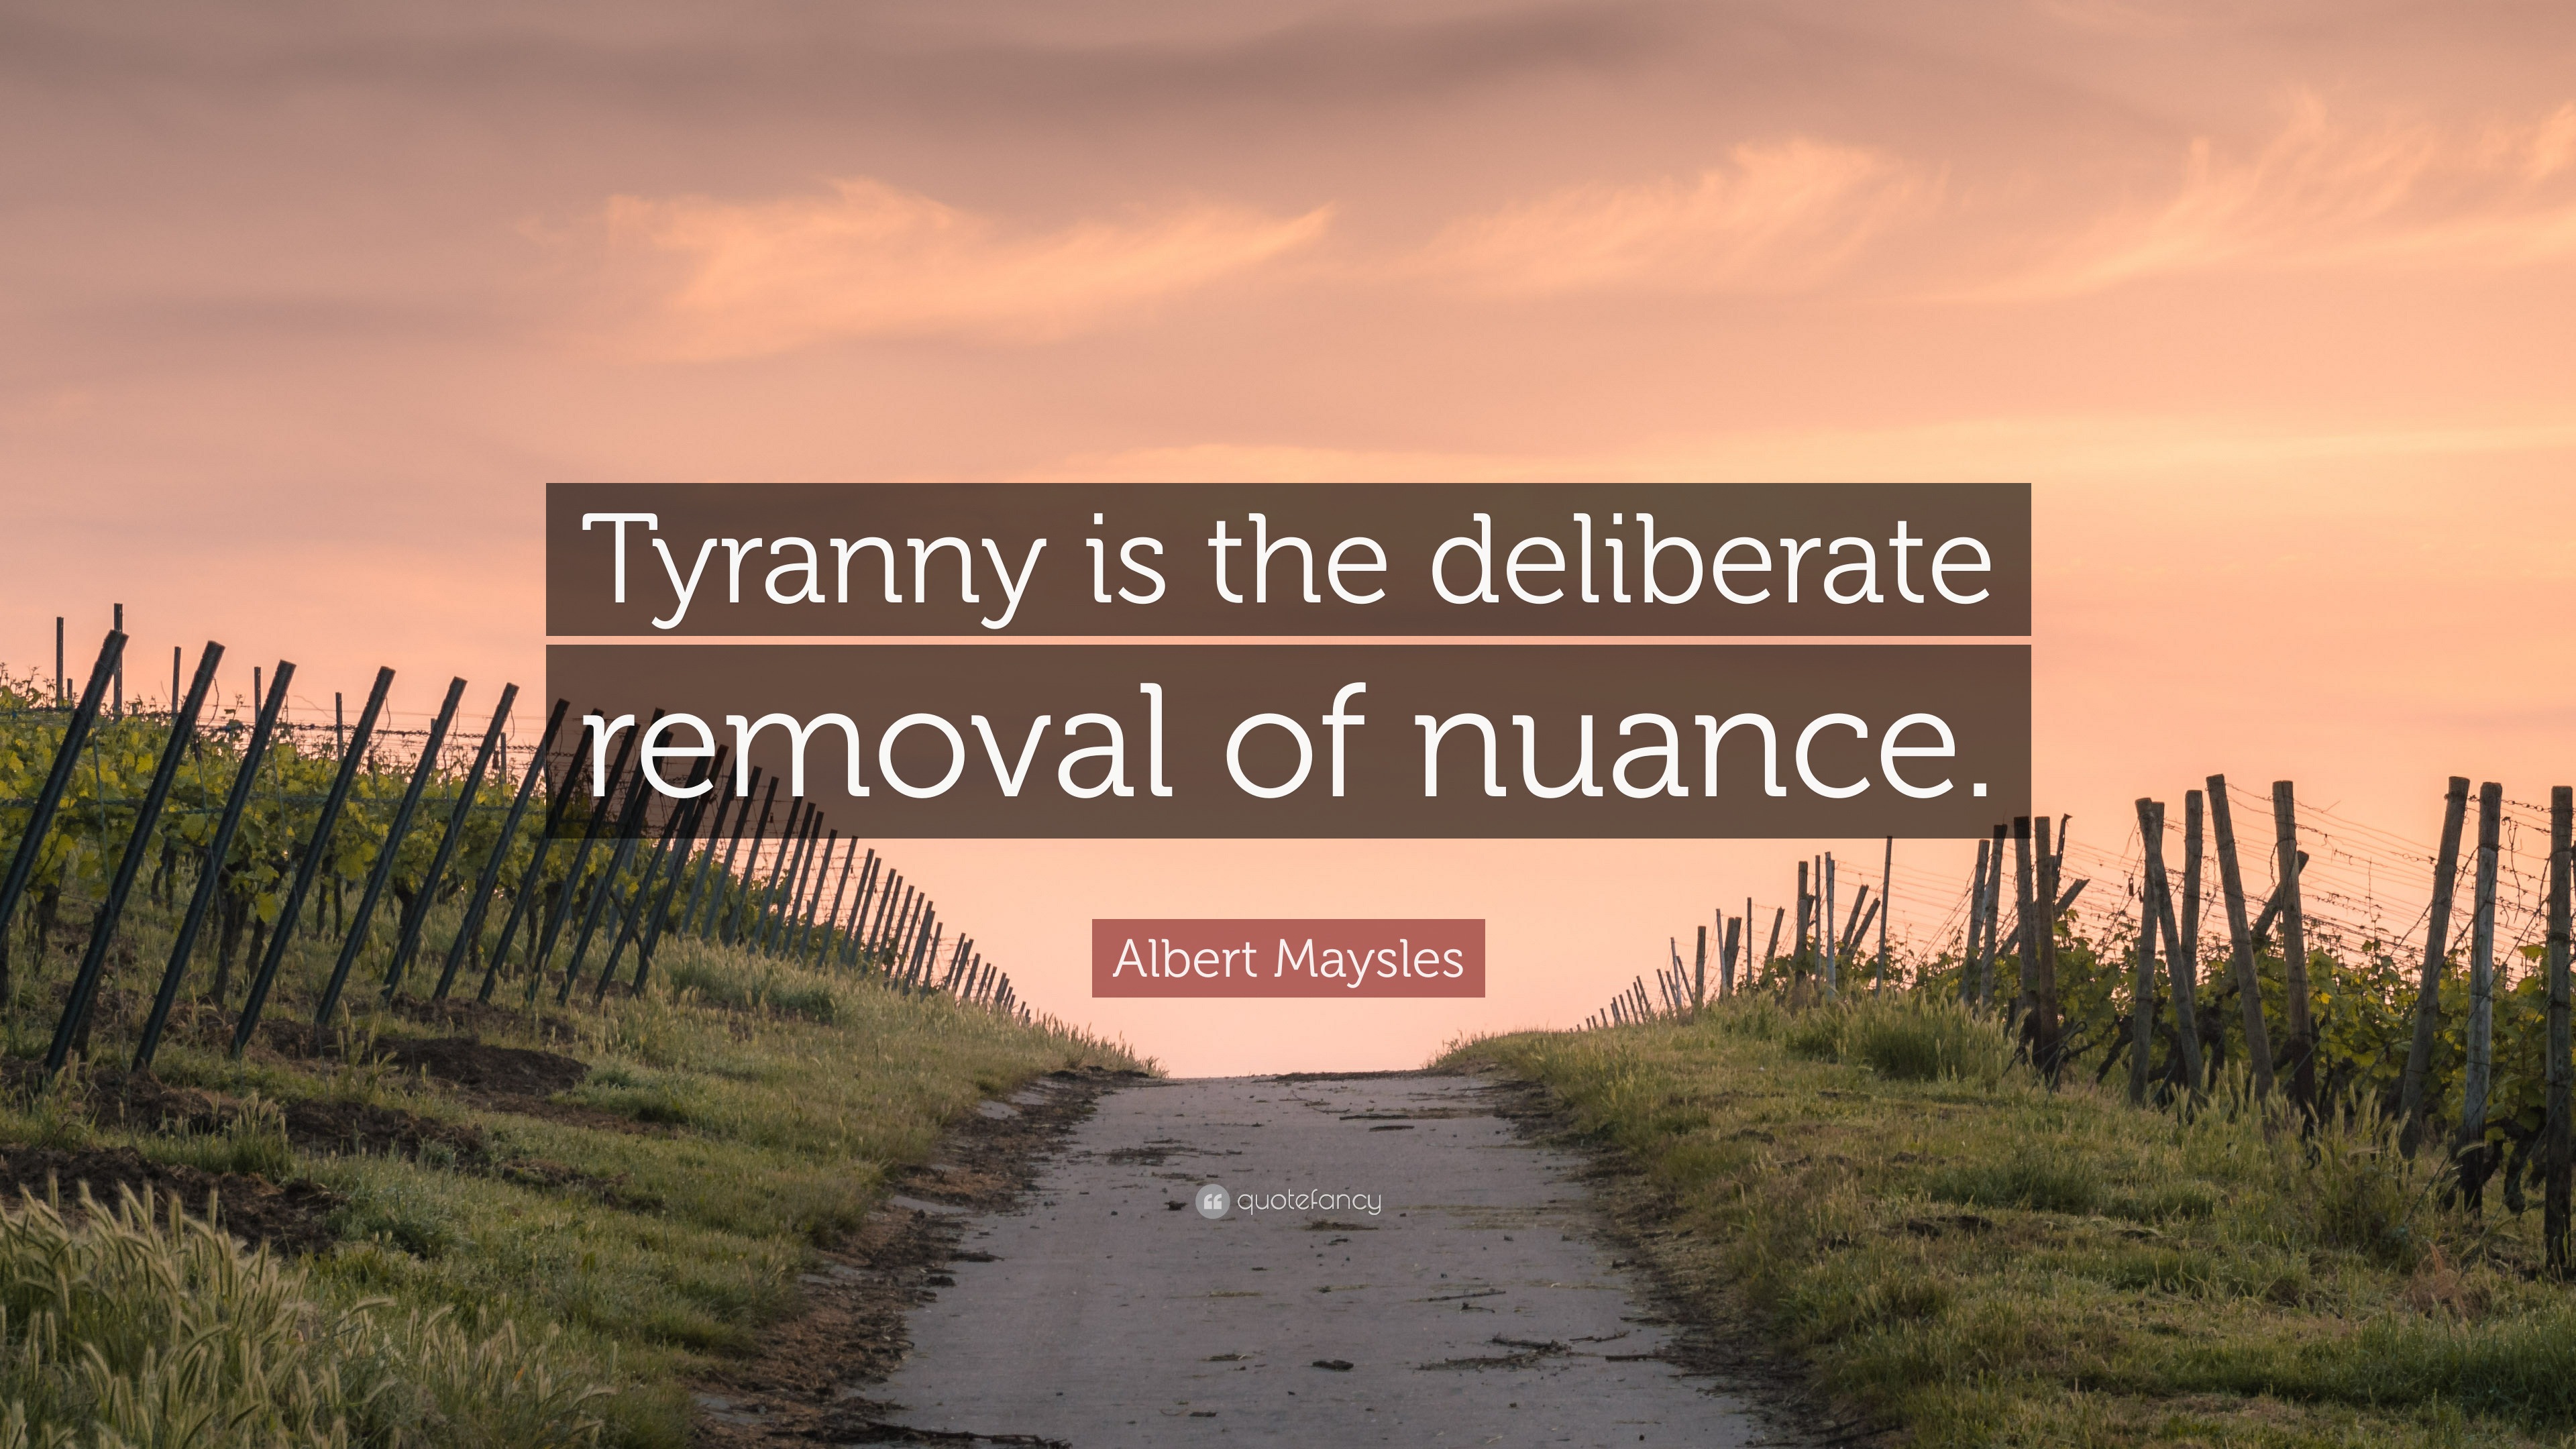 Tyranny is the removal of nuance aim in cognizant